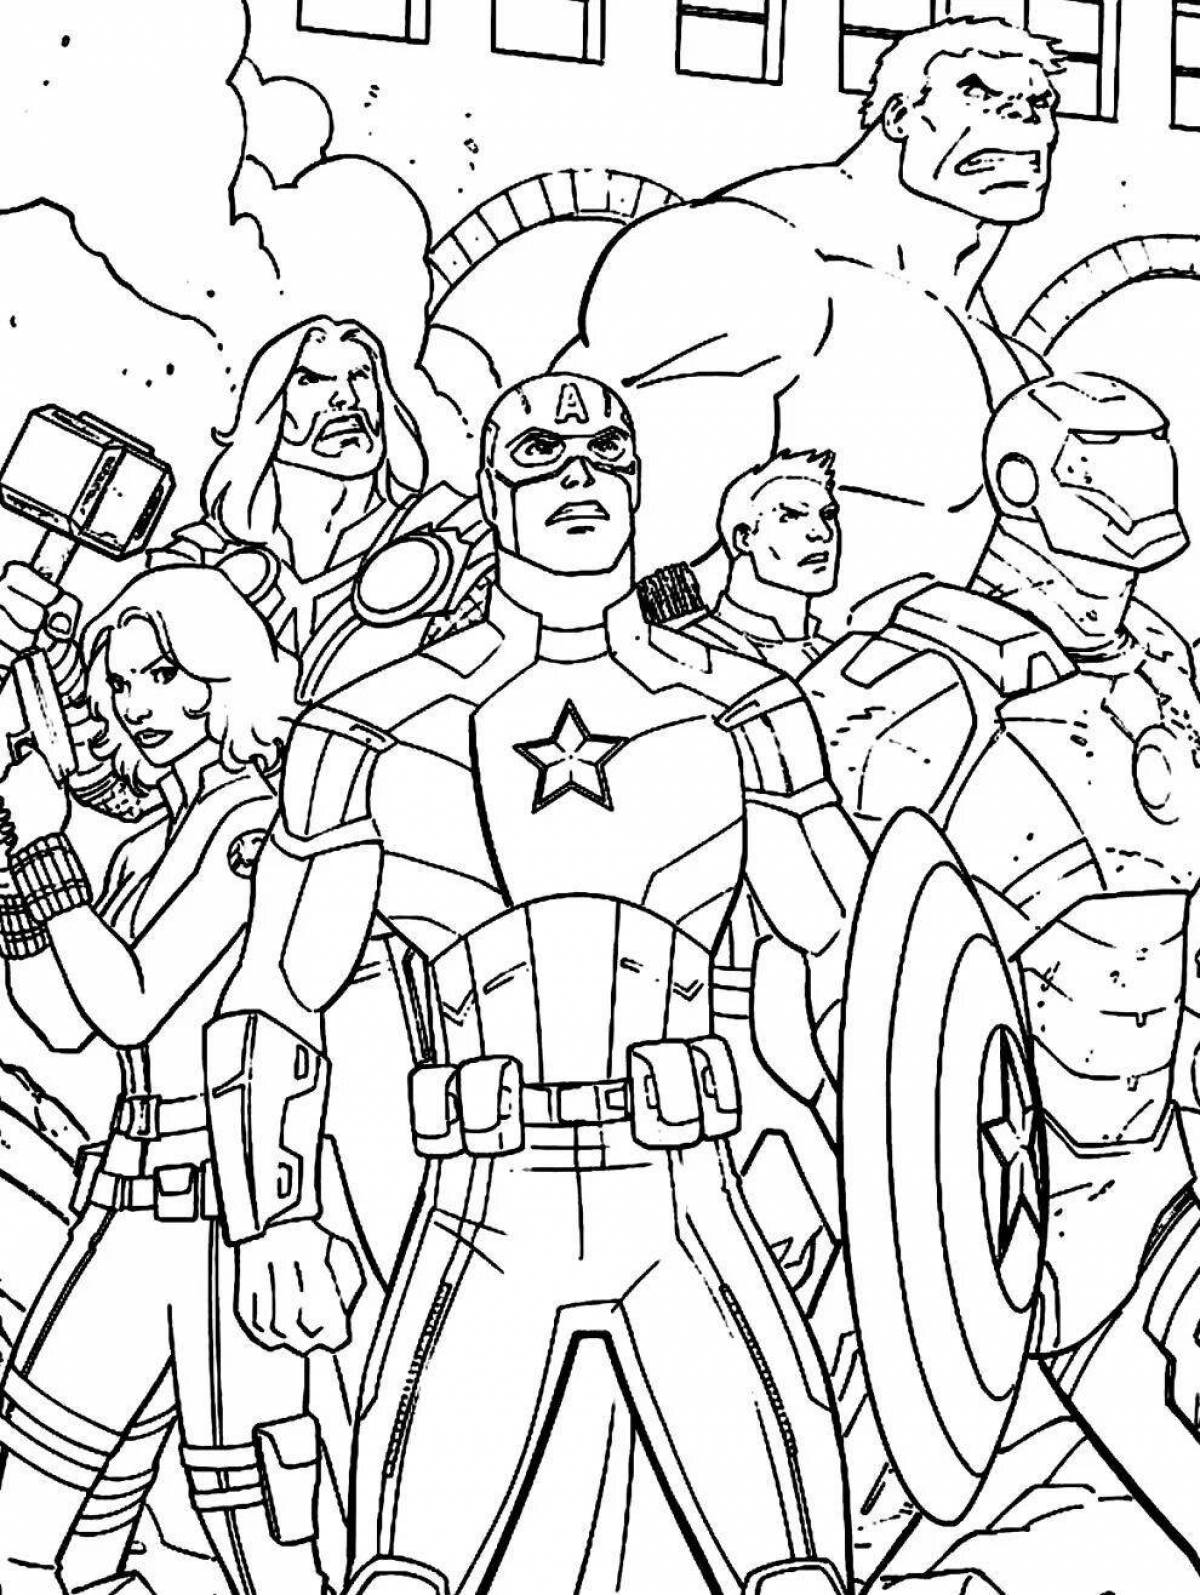 Great marvel coloring book for kids